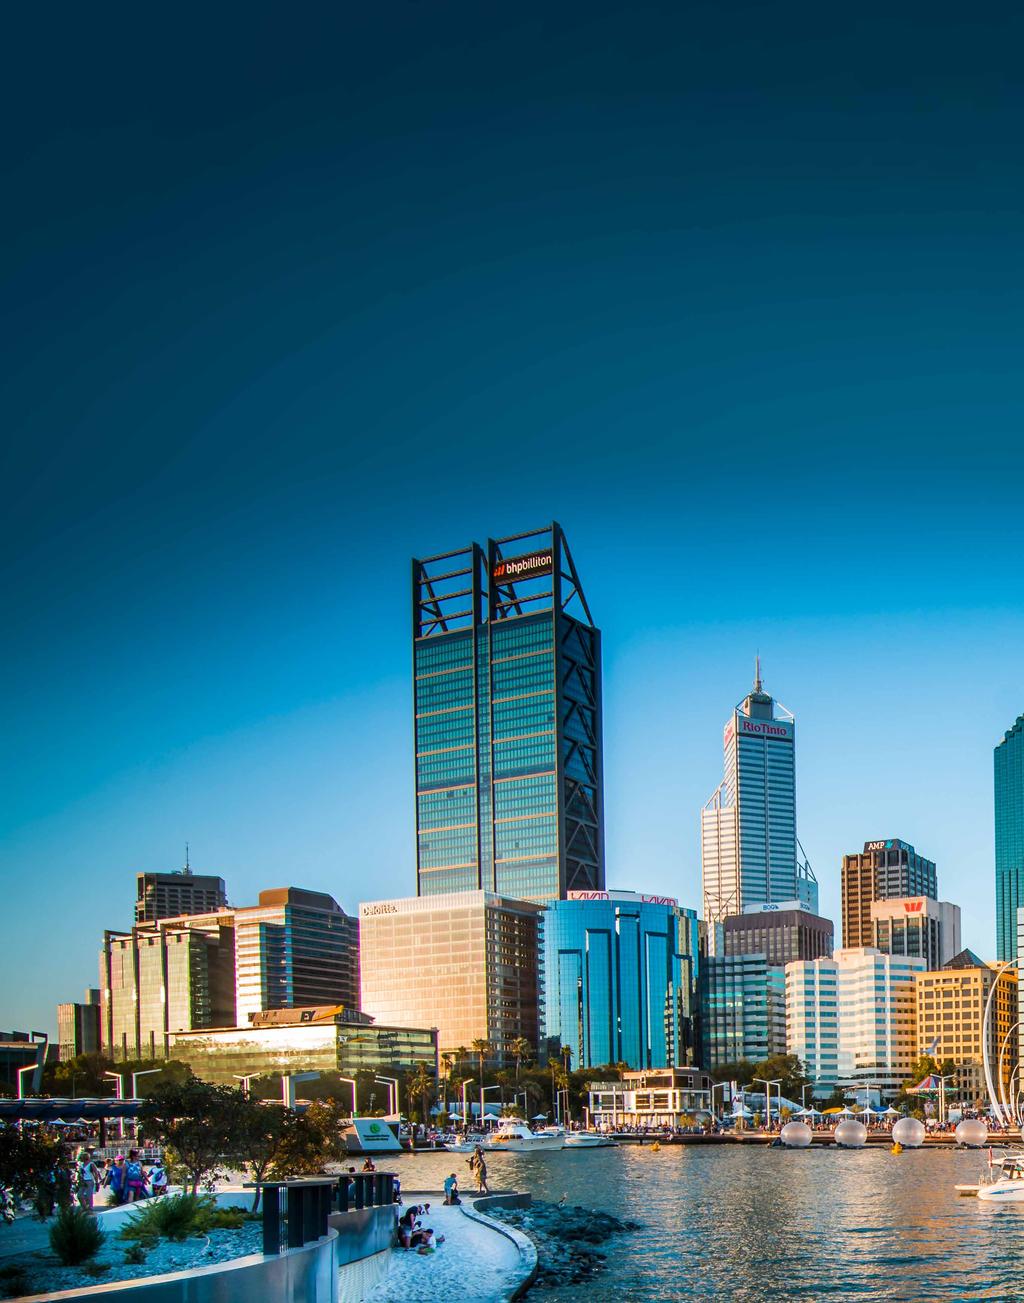 Perth Perth s economic success over the past 10 years has seen a significant increase in the number of companies establishing or relocating their national and international headquarters here, a trend